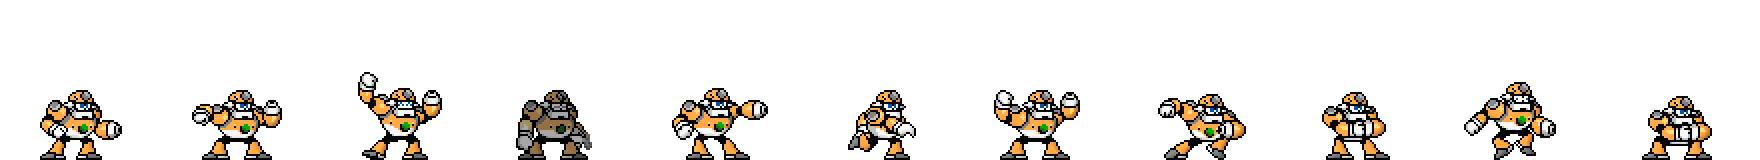 Concrete Man | Taunt Sprite Right<div style="margin-top: 4px; letting-spacing: 1px; font-size: 90%; font-family: Courier New; color: rgb(159, 150, 172);">[robot:right:taunt]{concrete-man}</div>